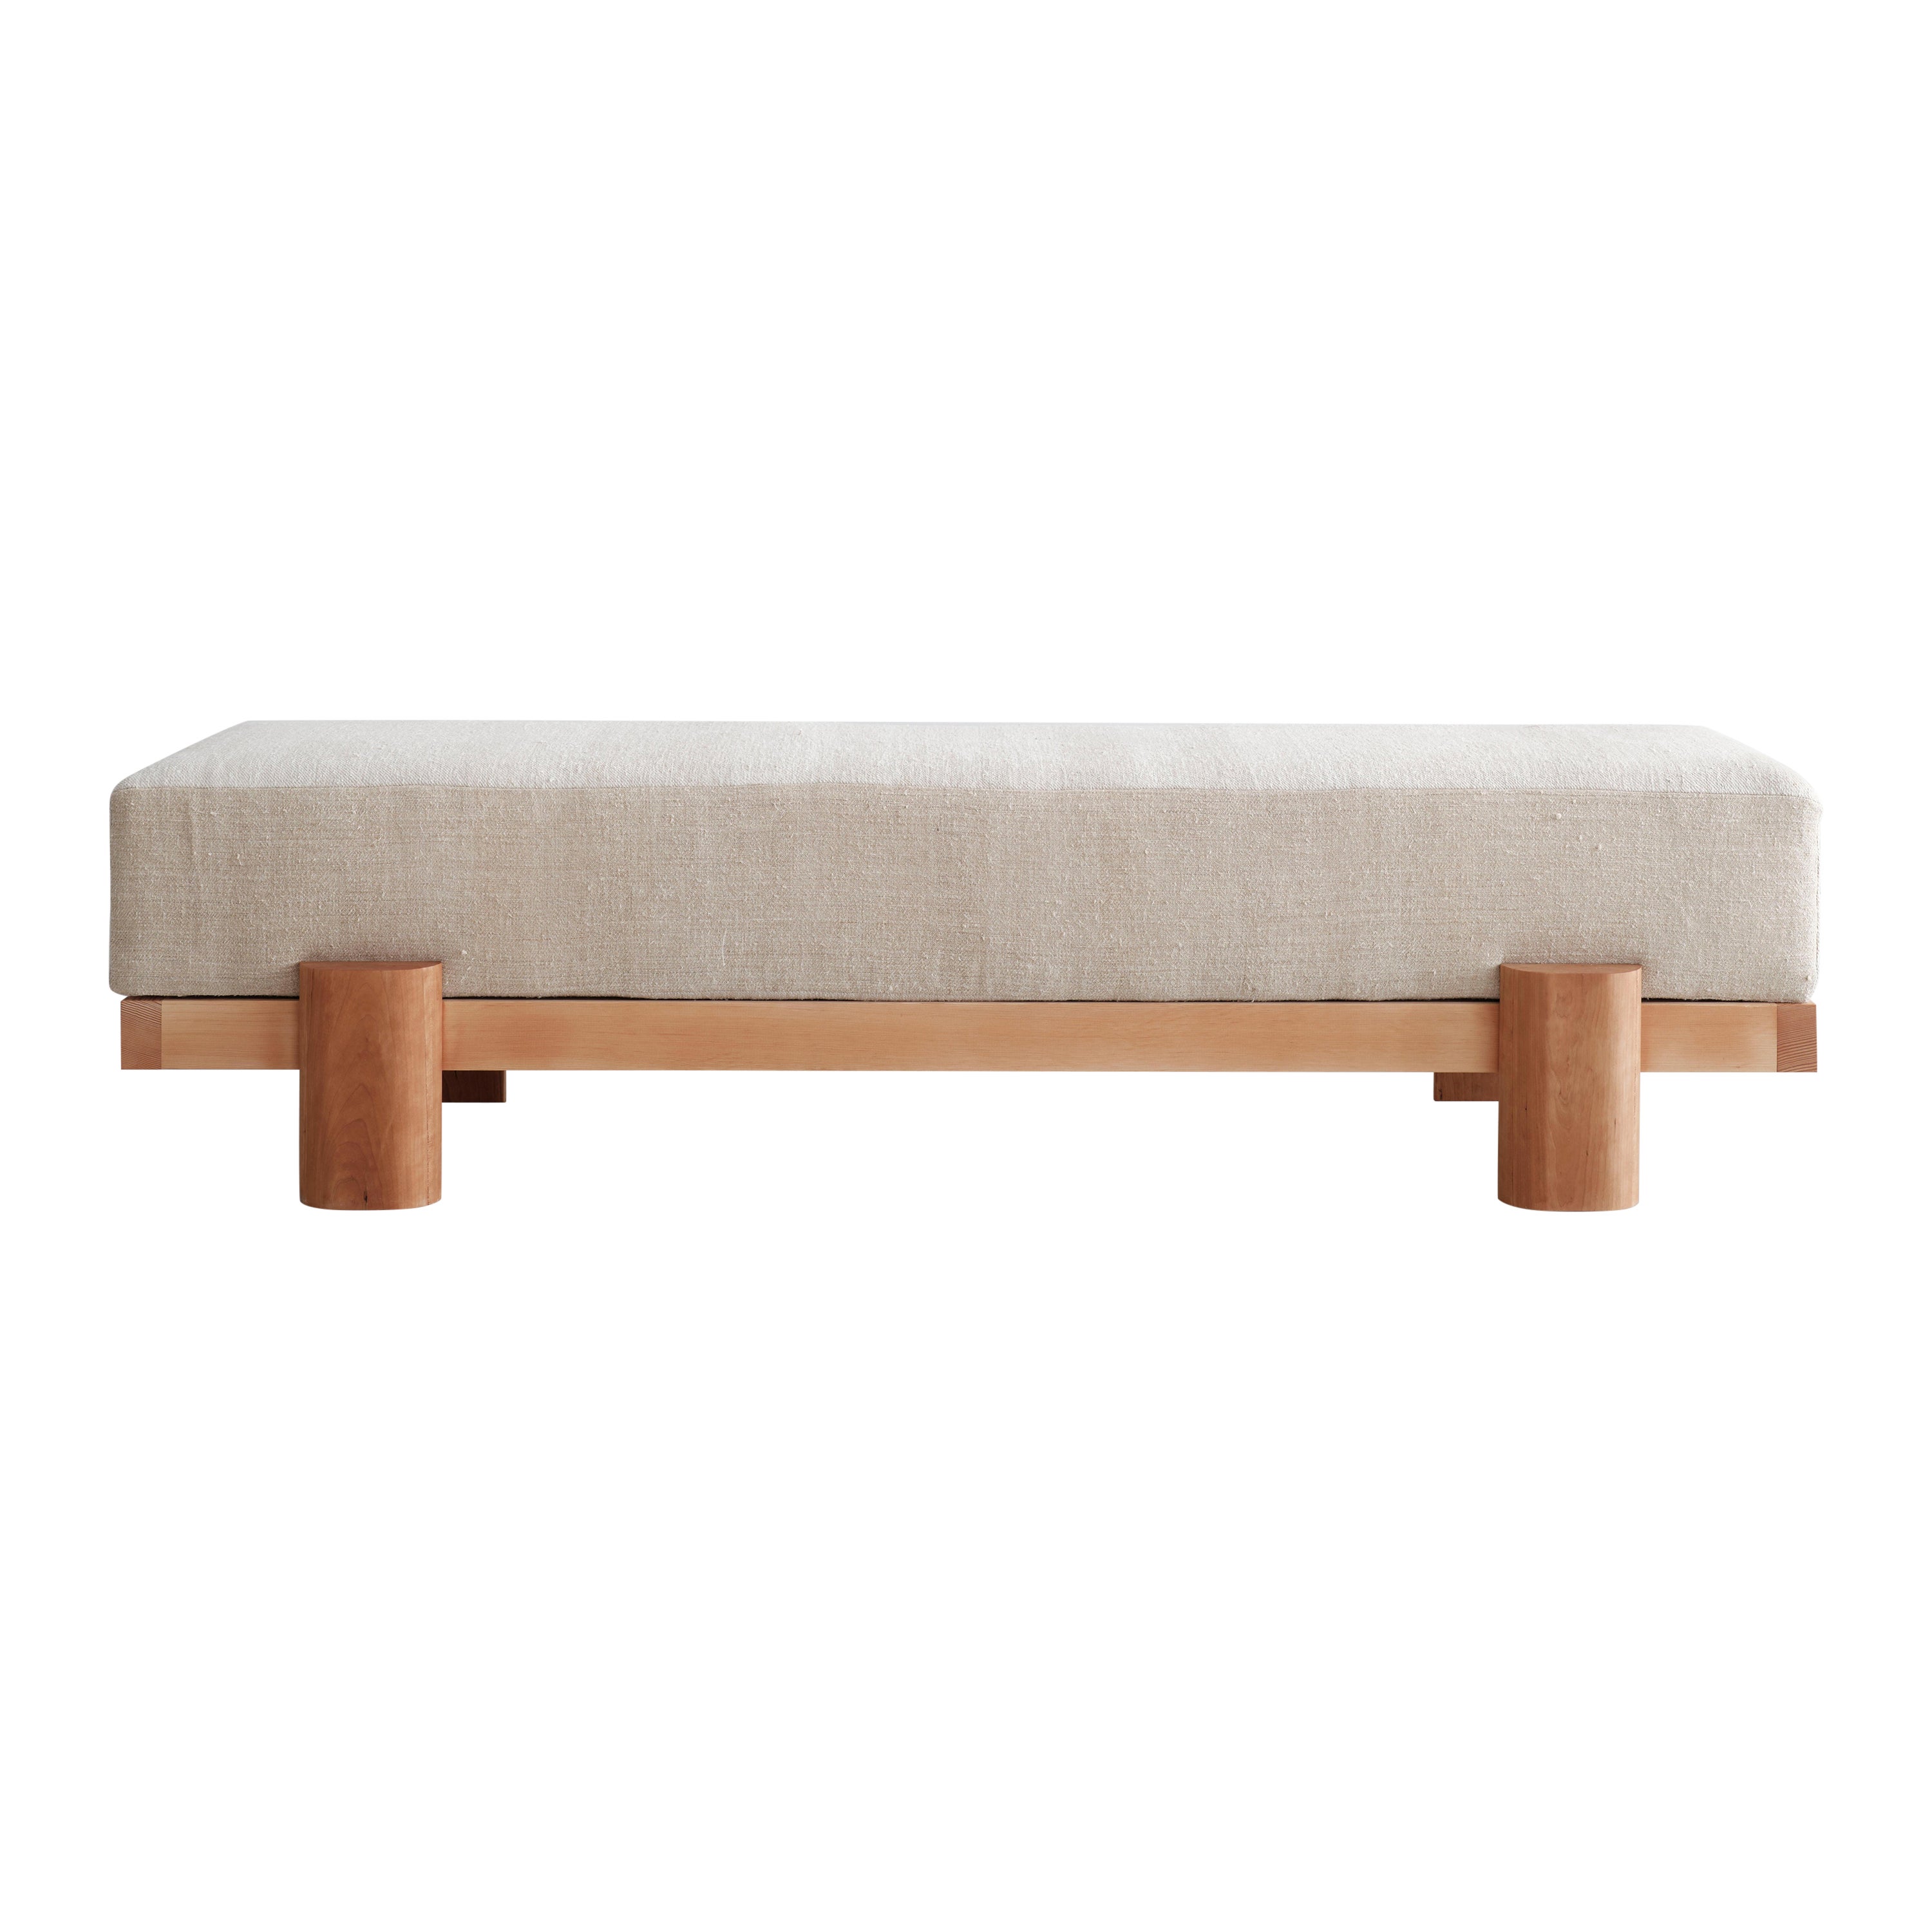 Upholstered Cherry Wood and Douglas Fir Bench by Gregory Beson For Sale